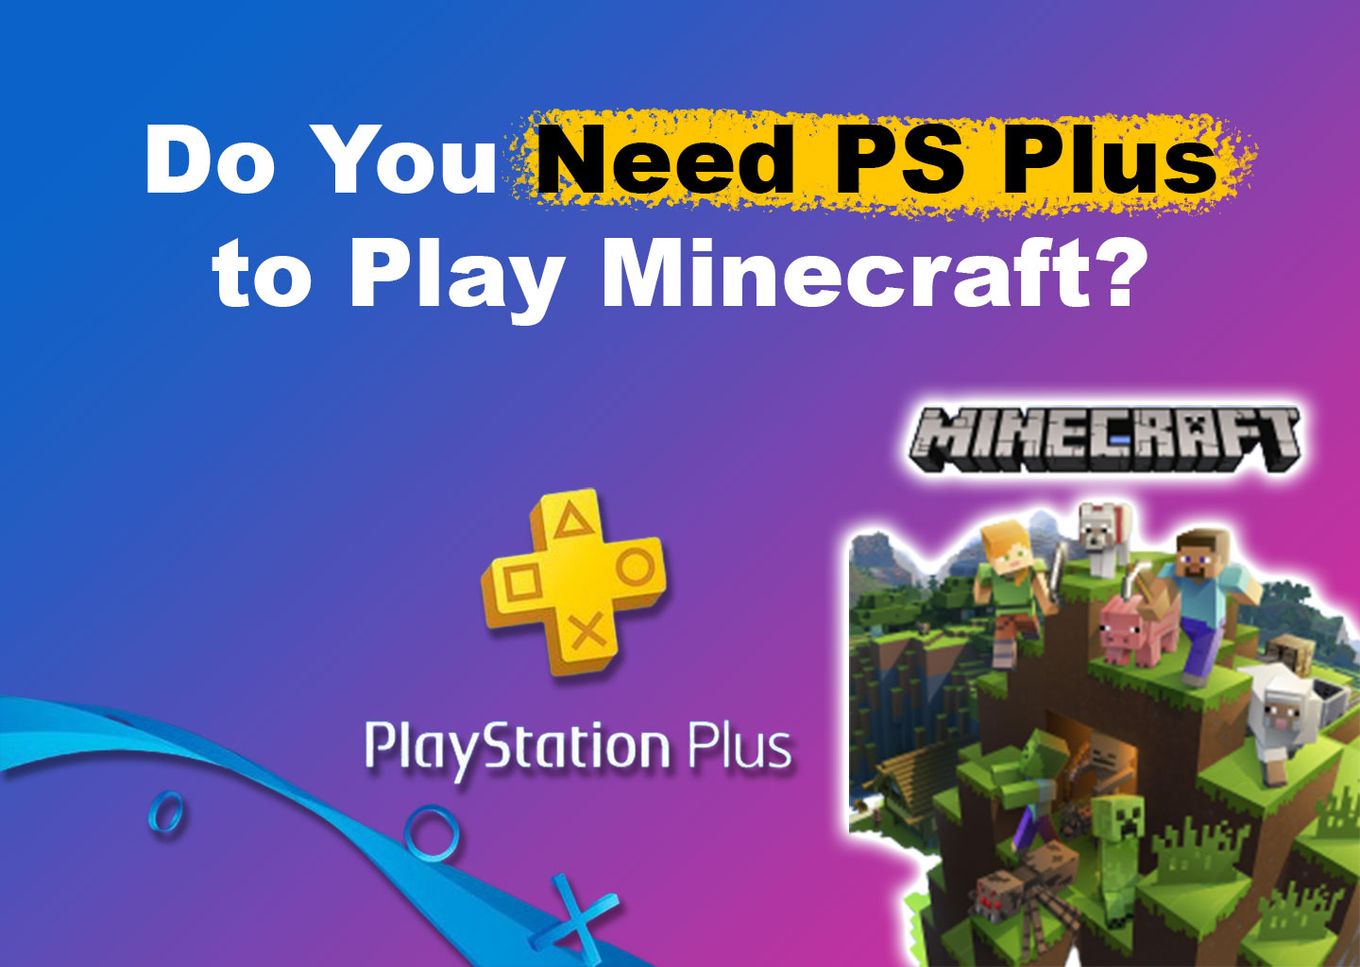 PS4: HOW TO PLAY ONLINE MULTIPLAYER FOR FREE WITHOUT PLAYSTATION